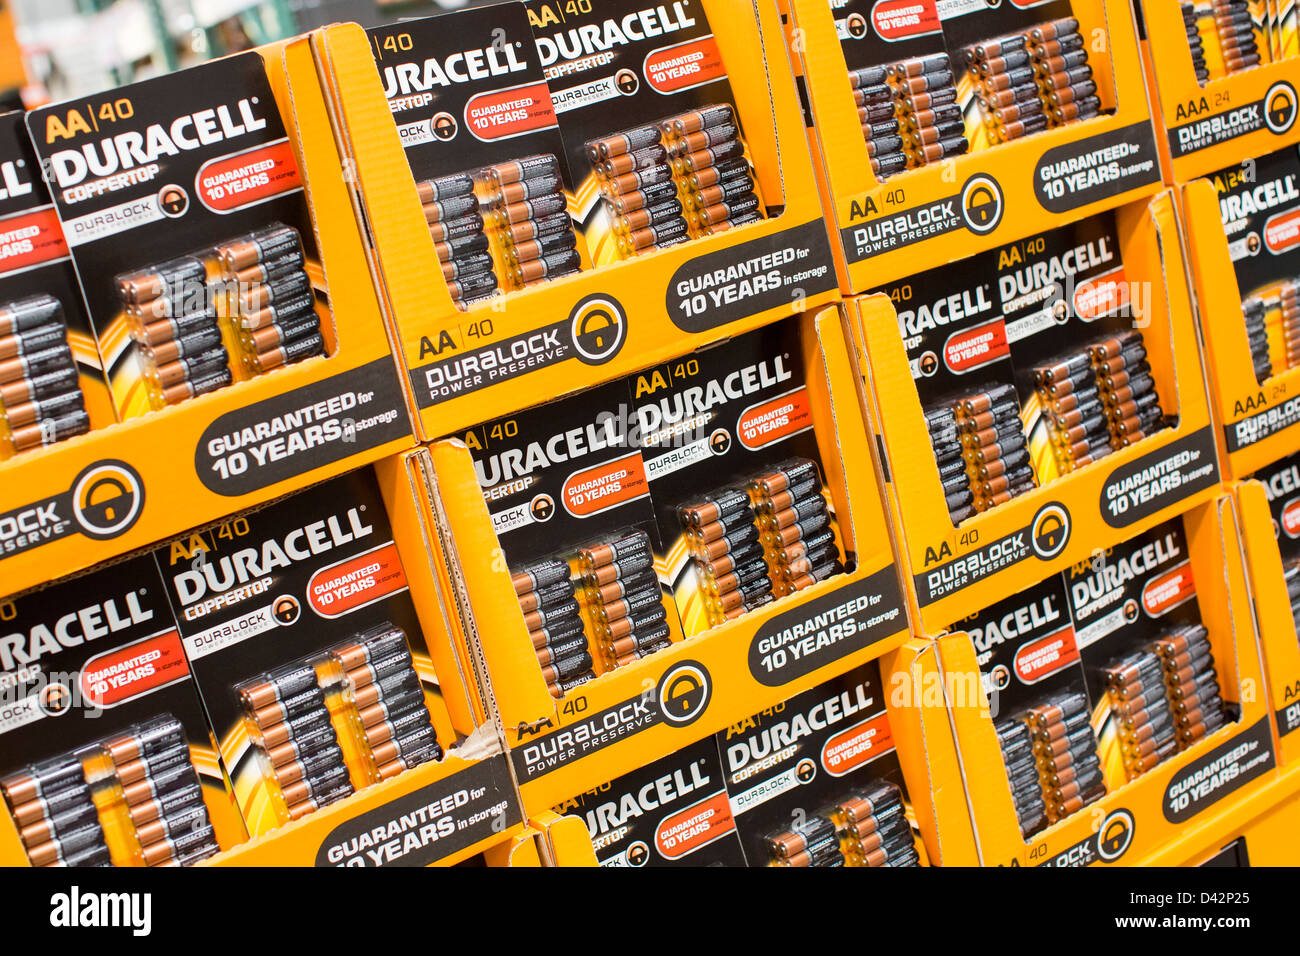 Duracell batteries on display at a Costco Wholesale Warehouse Club. Stock Photo